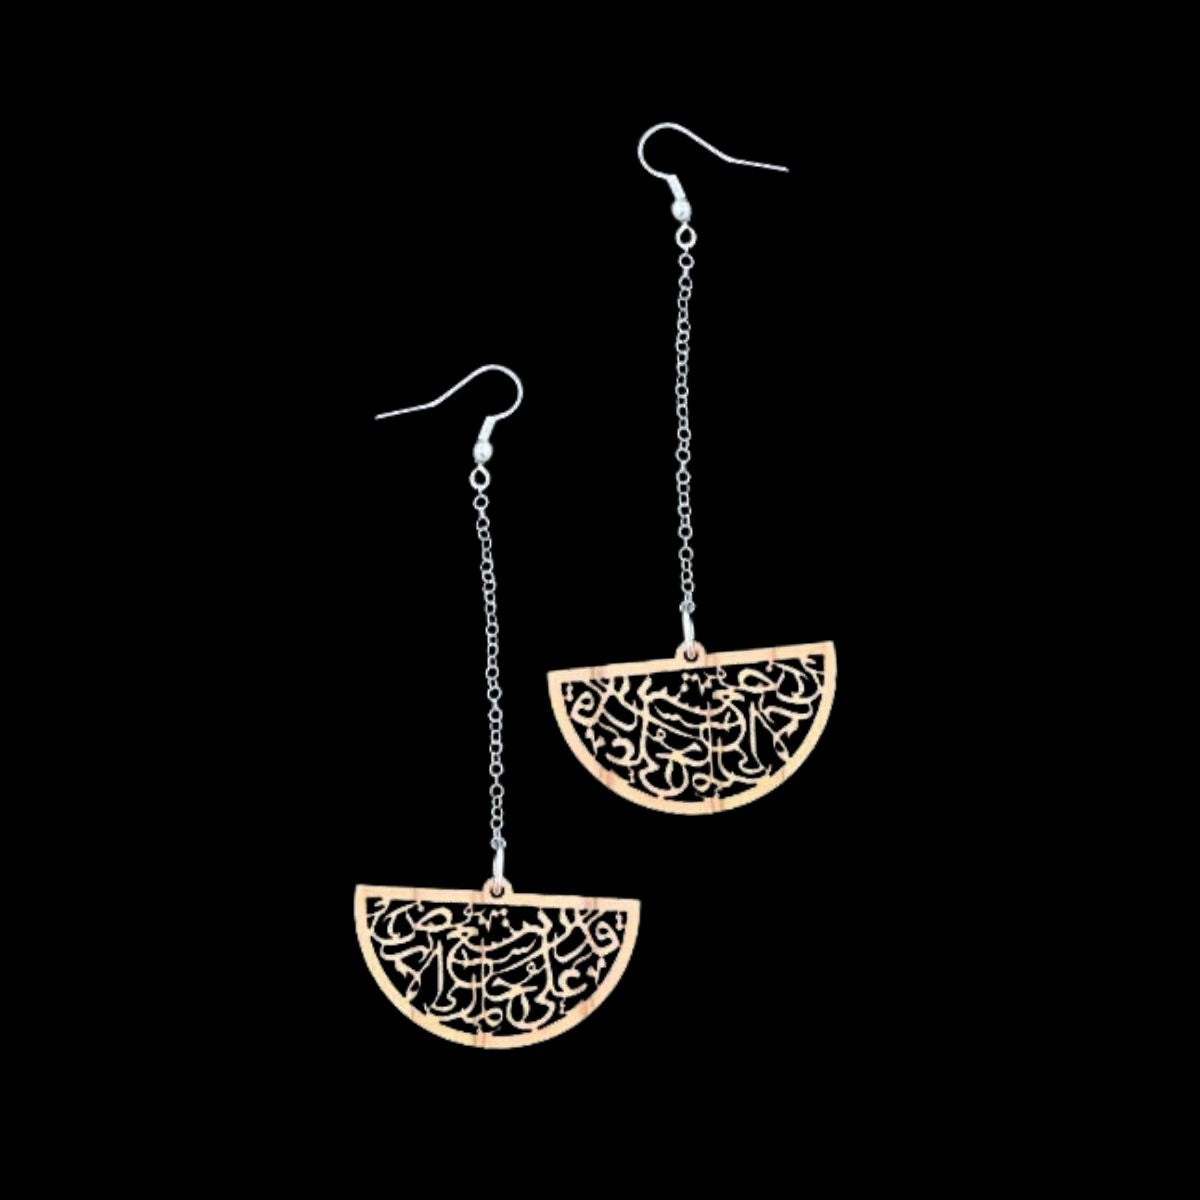 Olivewood Arabic Calligraphy Earrings "In accordance with your dreams..."